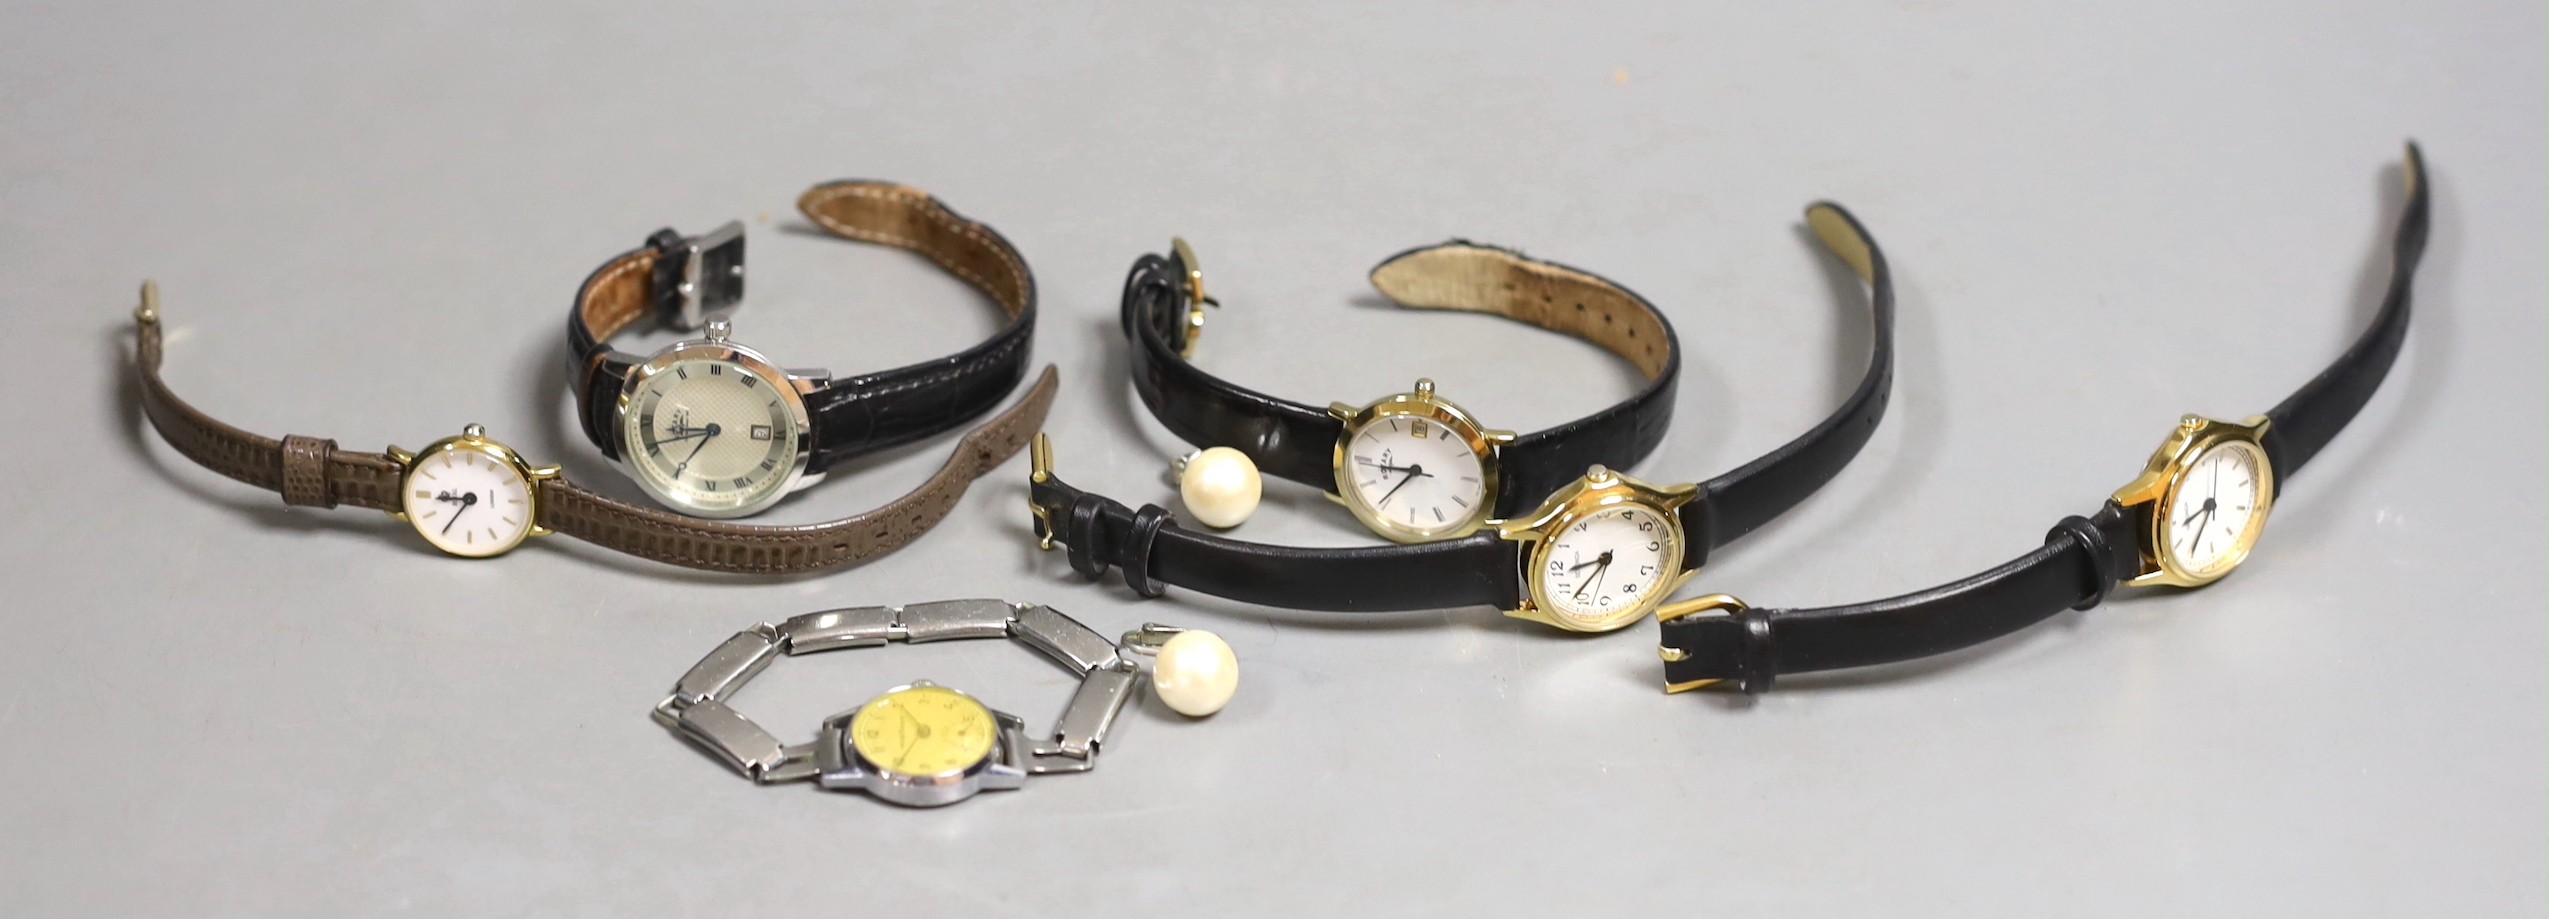 Six various lady's wrist watches, with quartz and other movements, including Sekonda and Rotary and a pair of simulated pearl earrings.